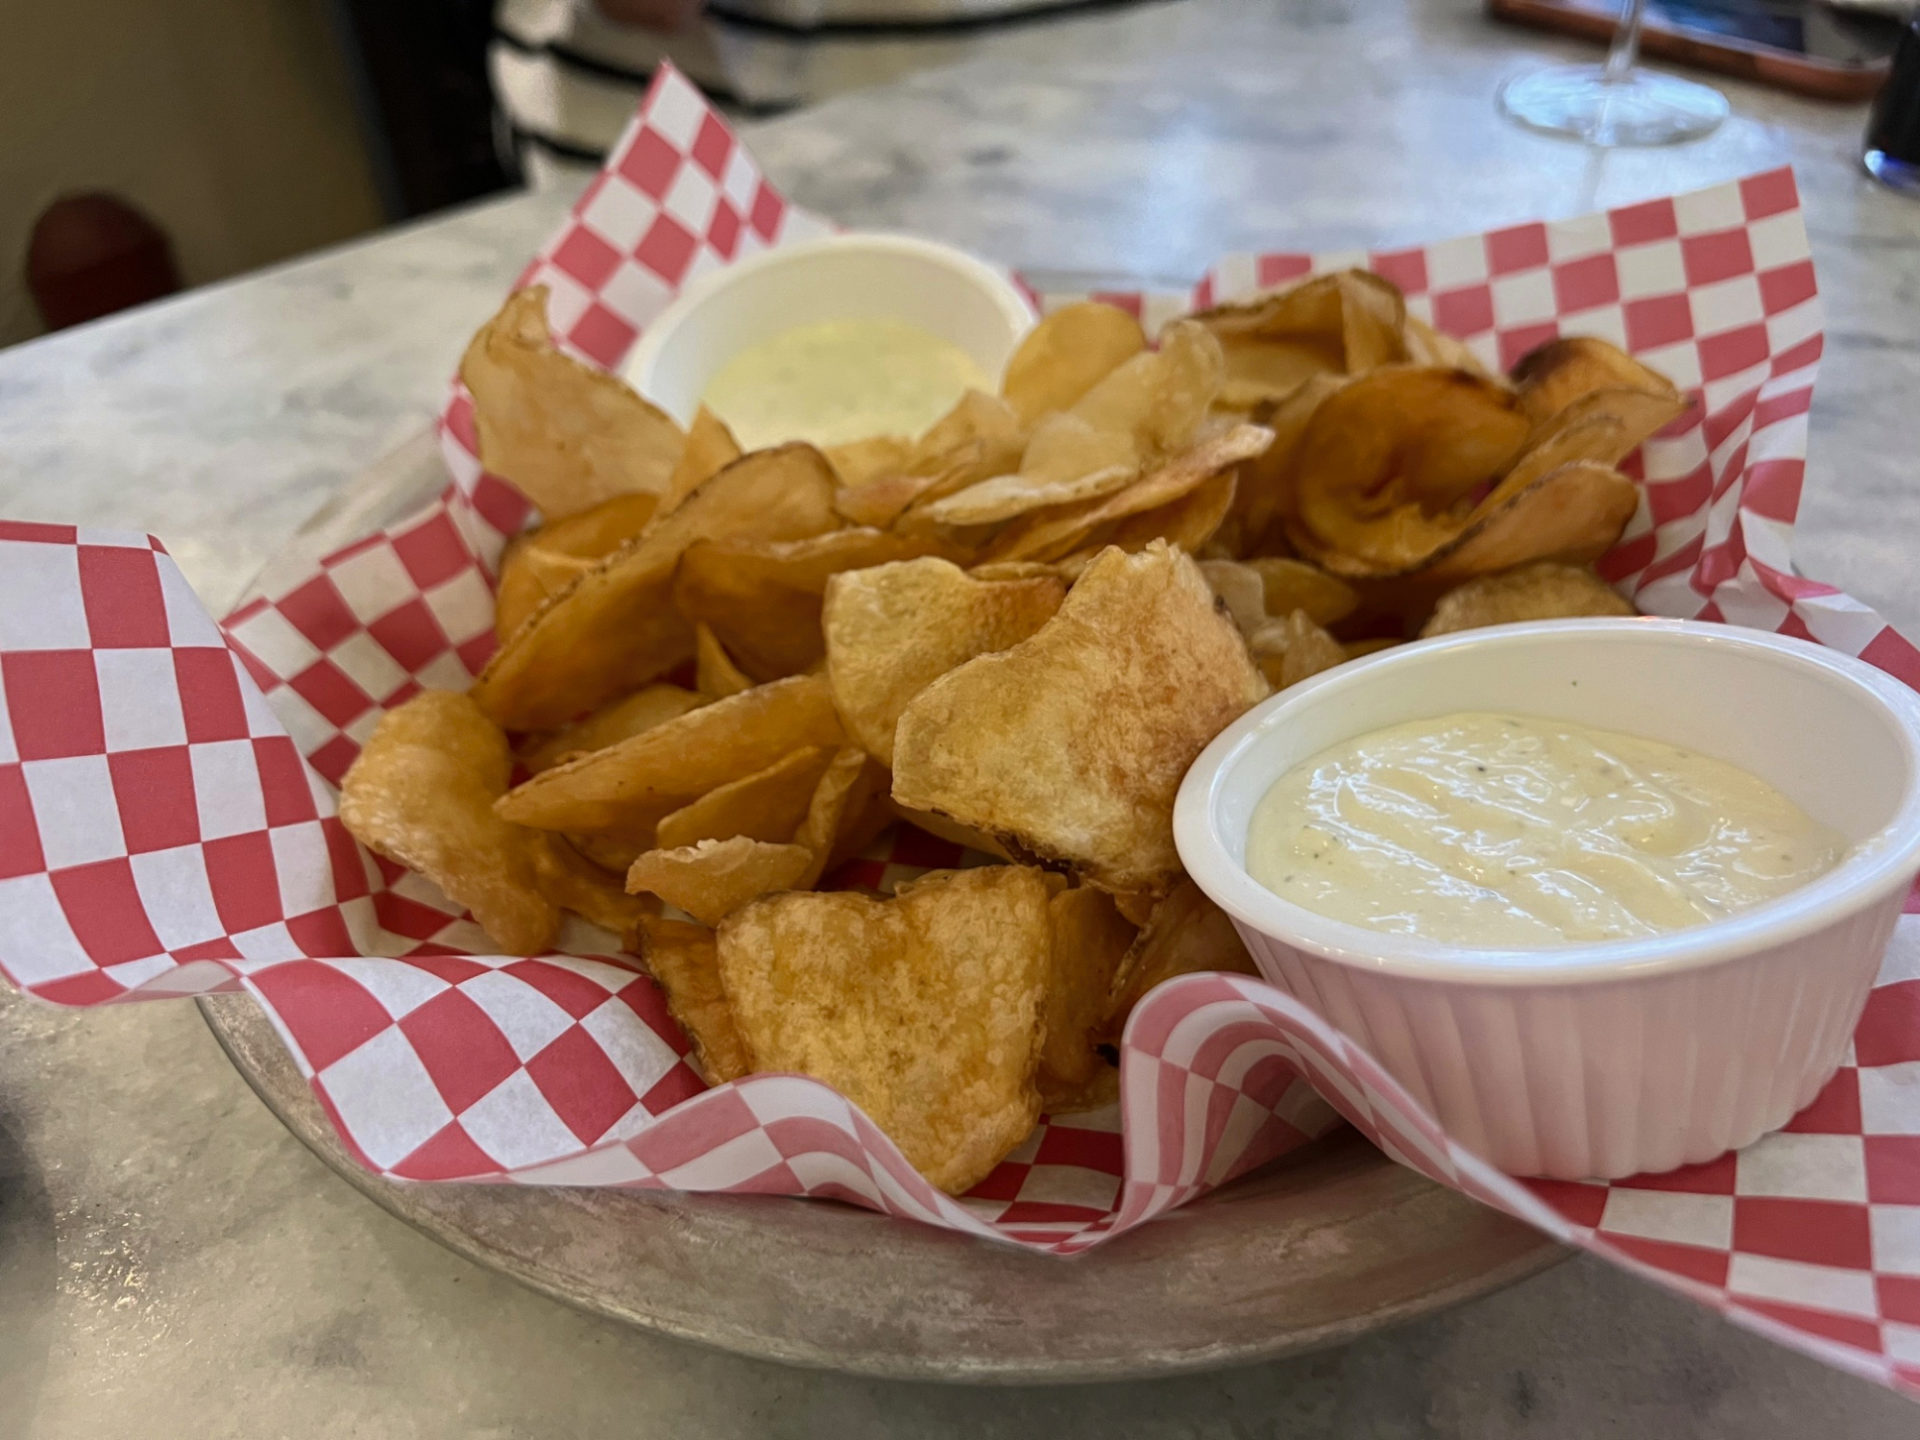 An order of handcut chips from Farren's Pub in Champaign, Illinois.